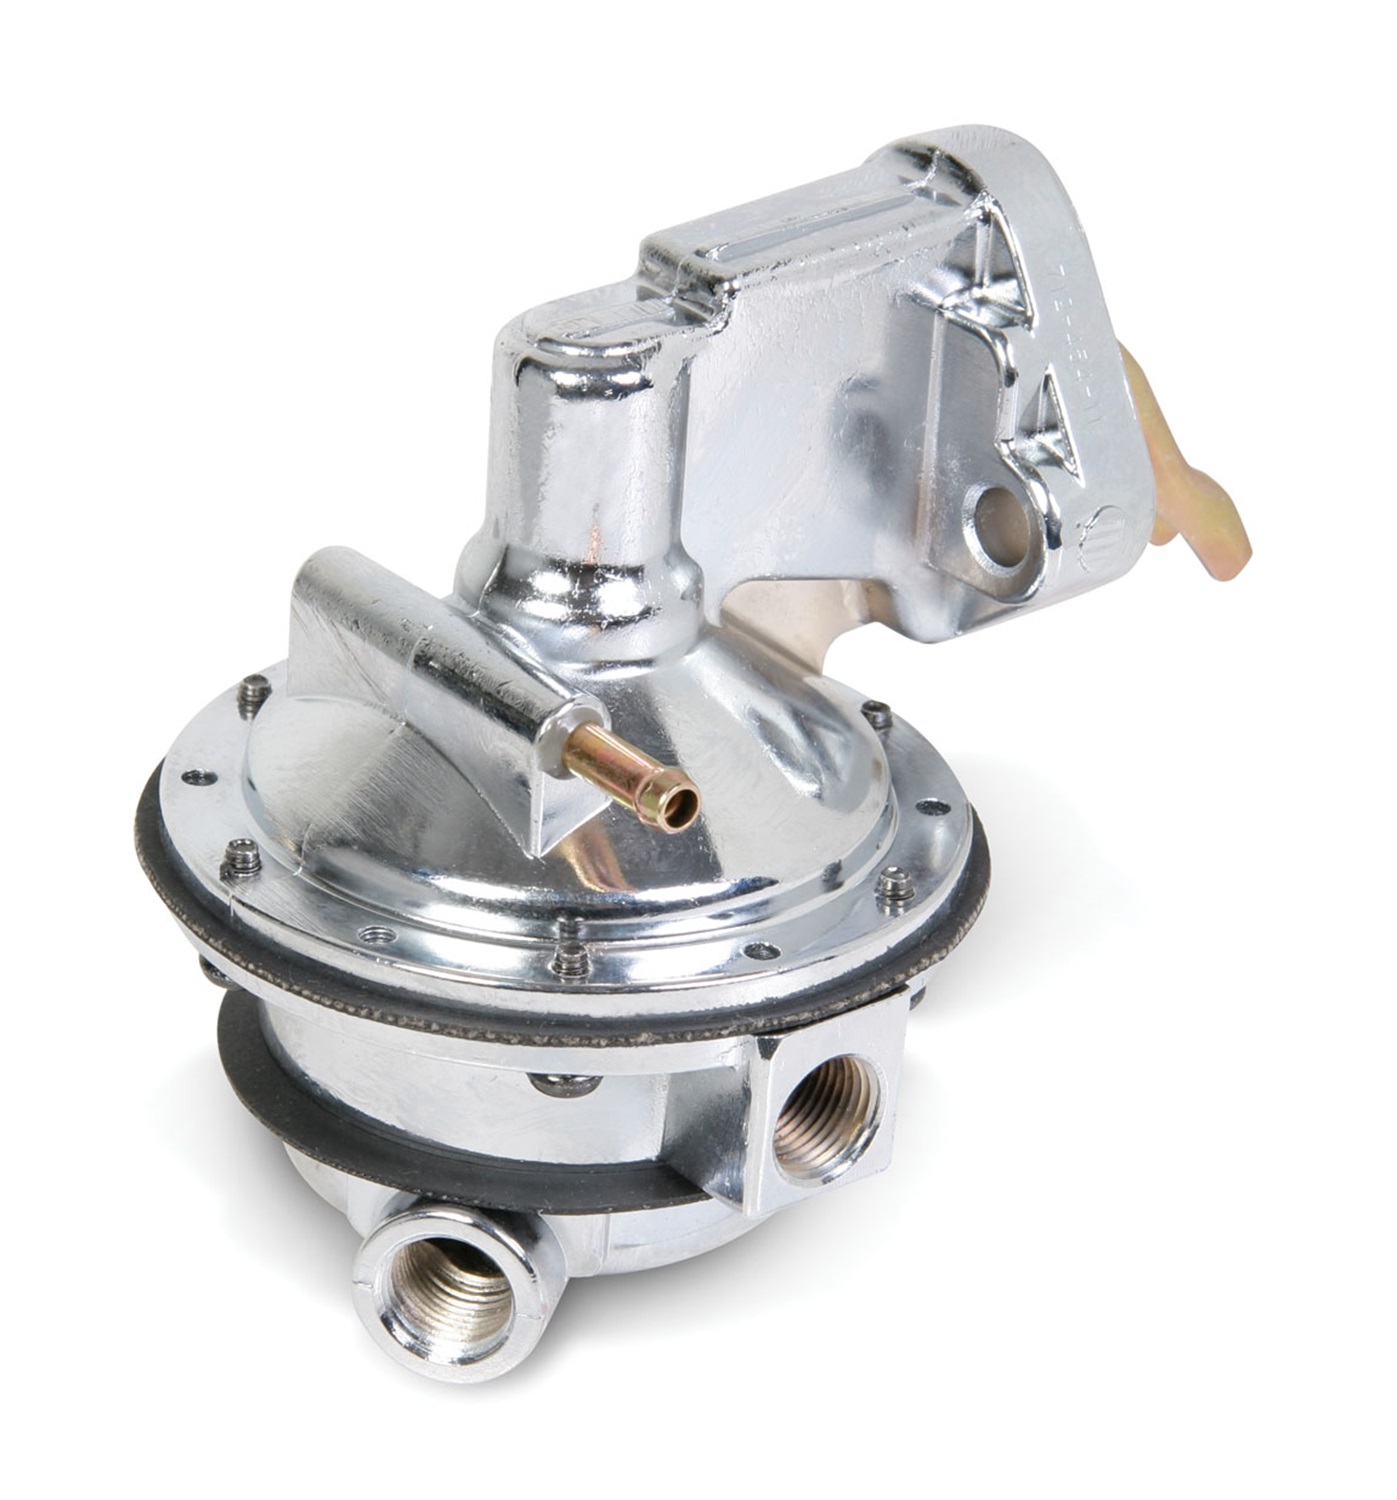 Holley Performance Holley Performance 712-454-13 Mechanical Fuel Pump